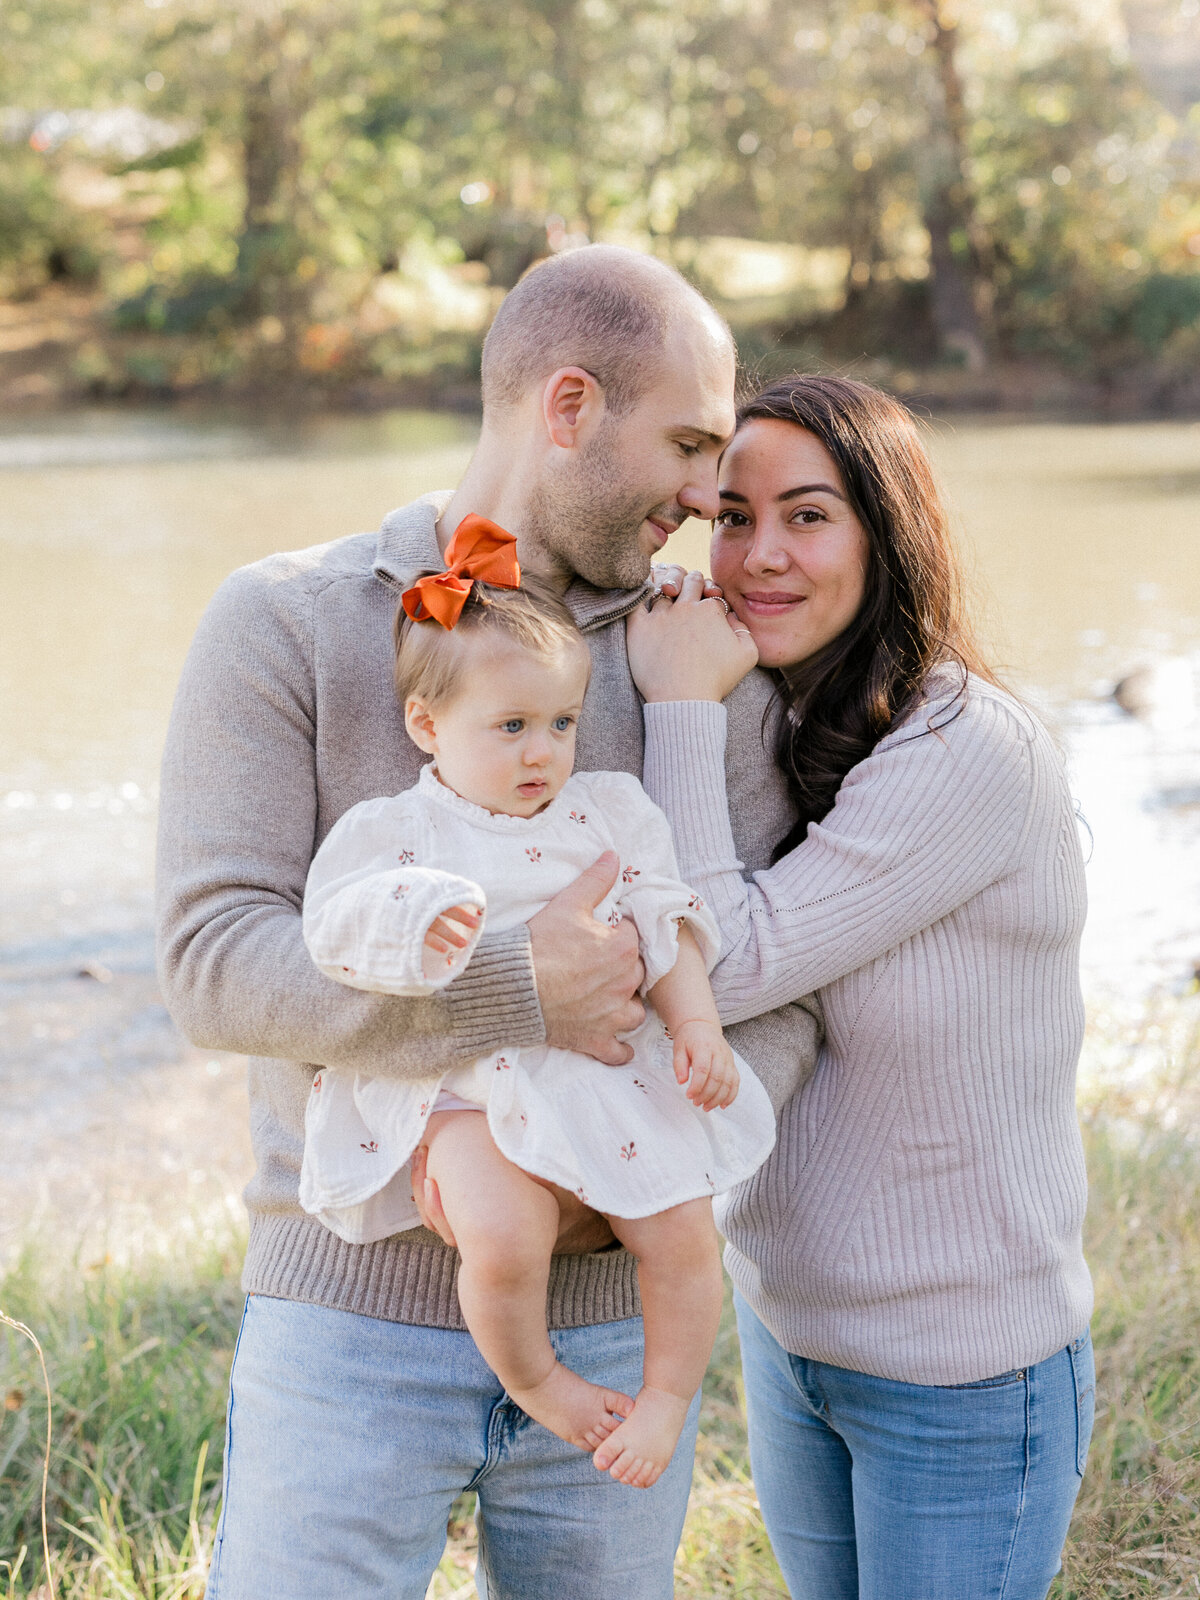 Fall family session at Lake Peachtree. Family holding hands.